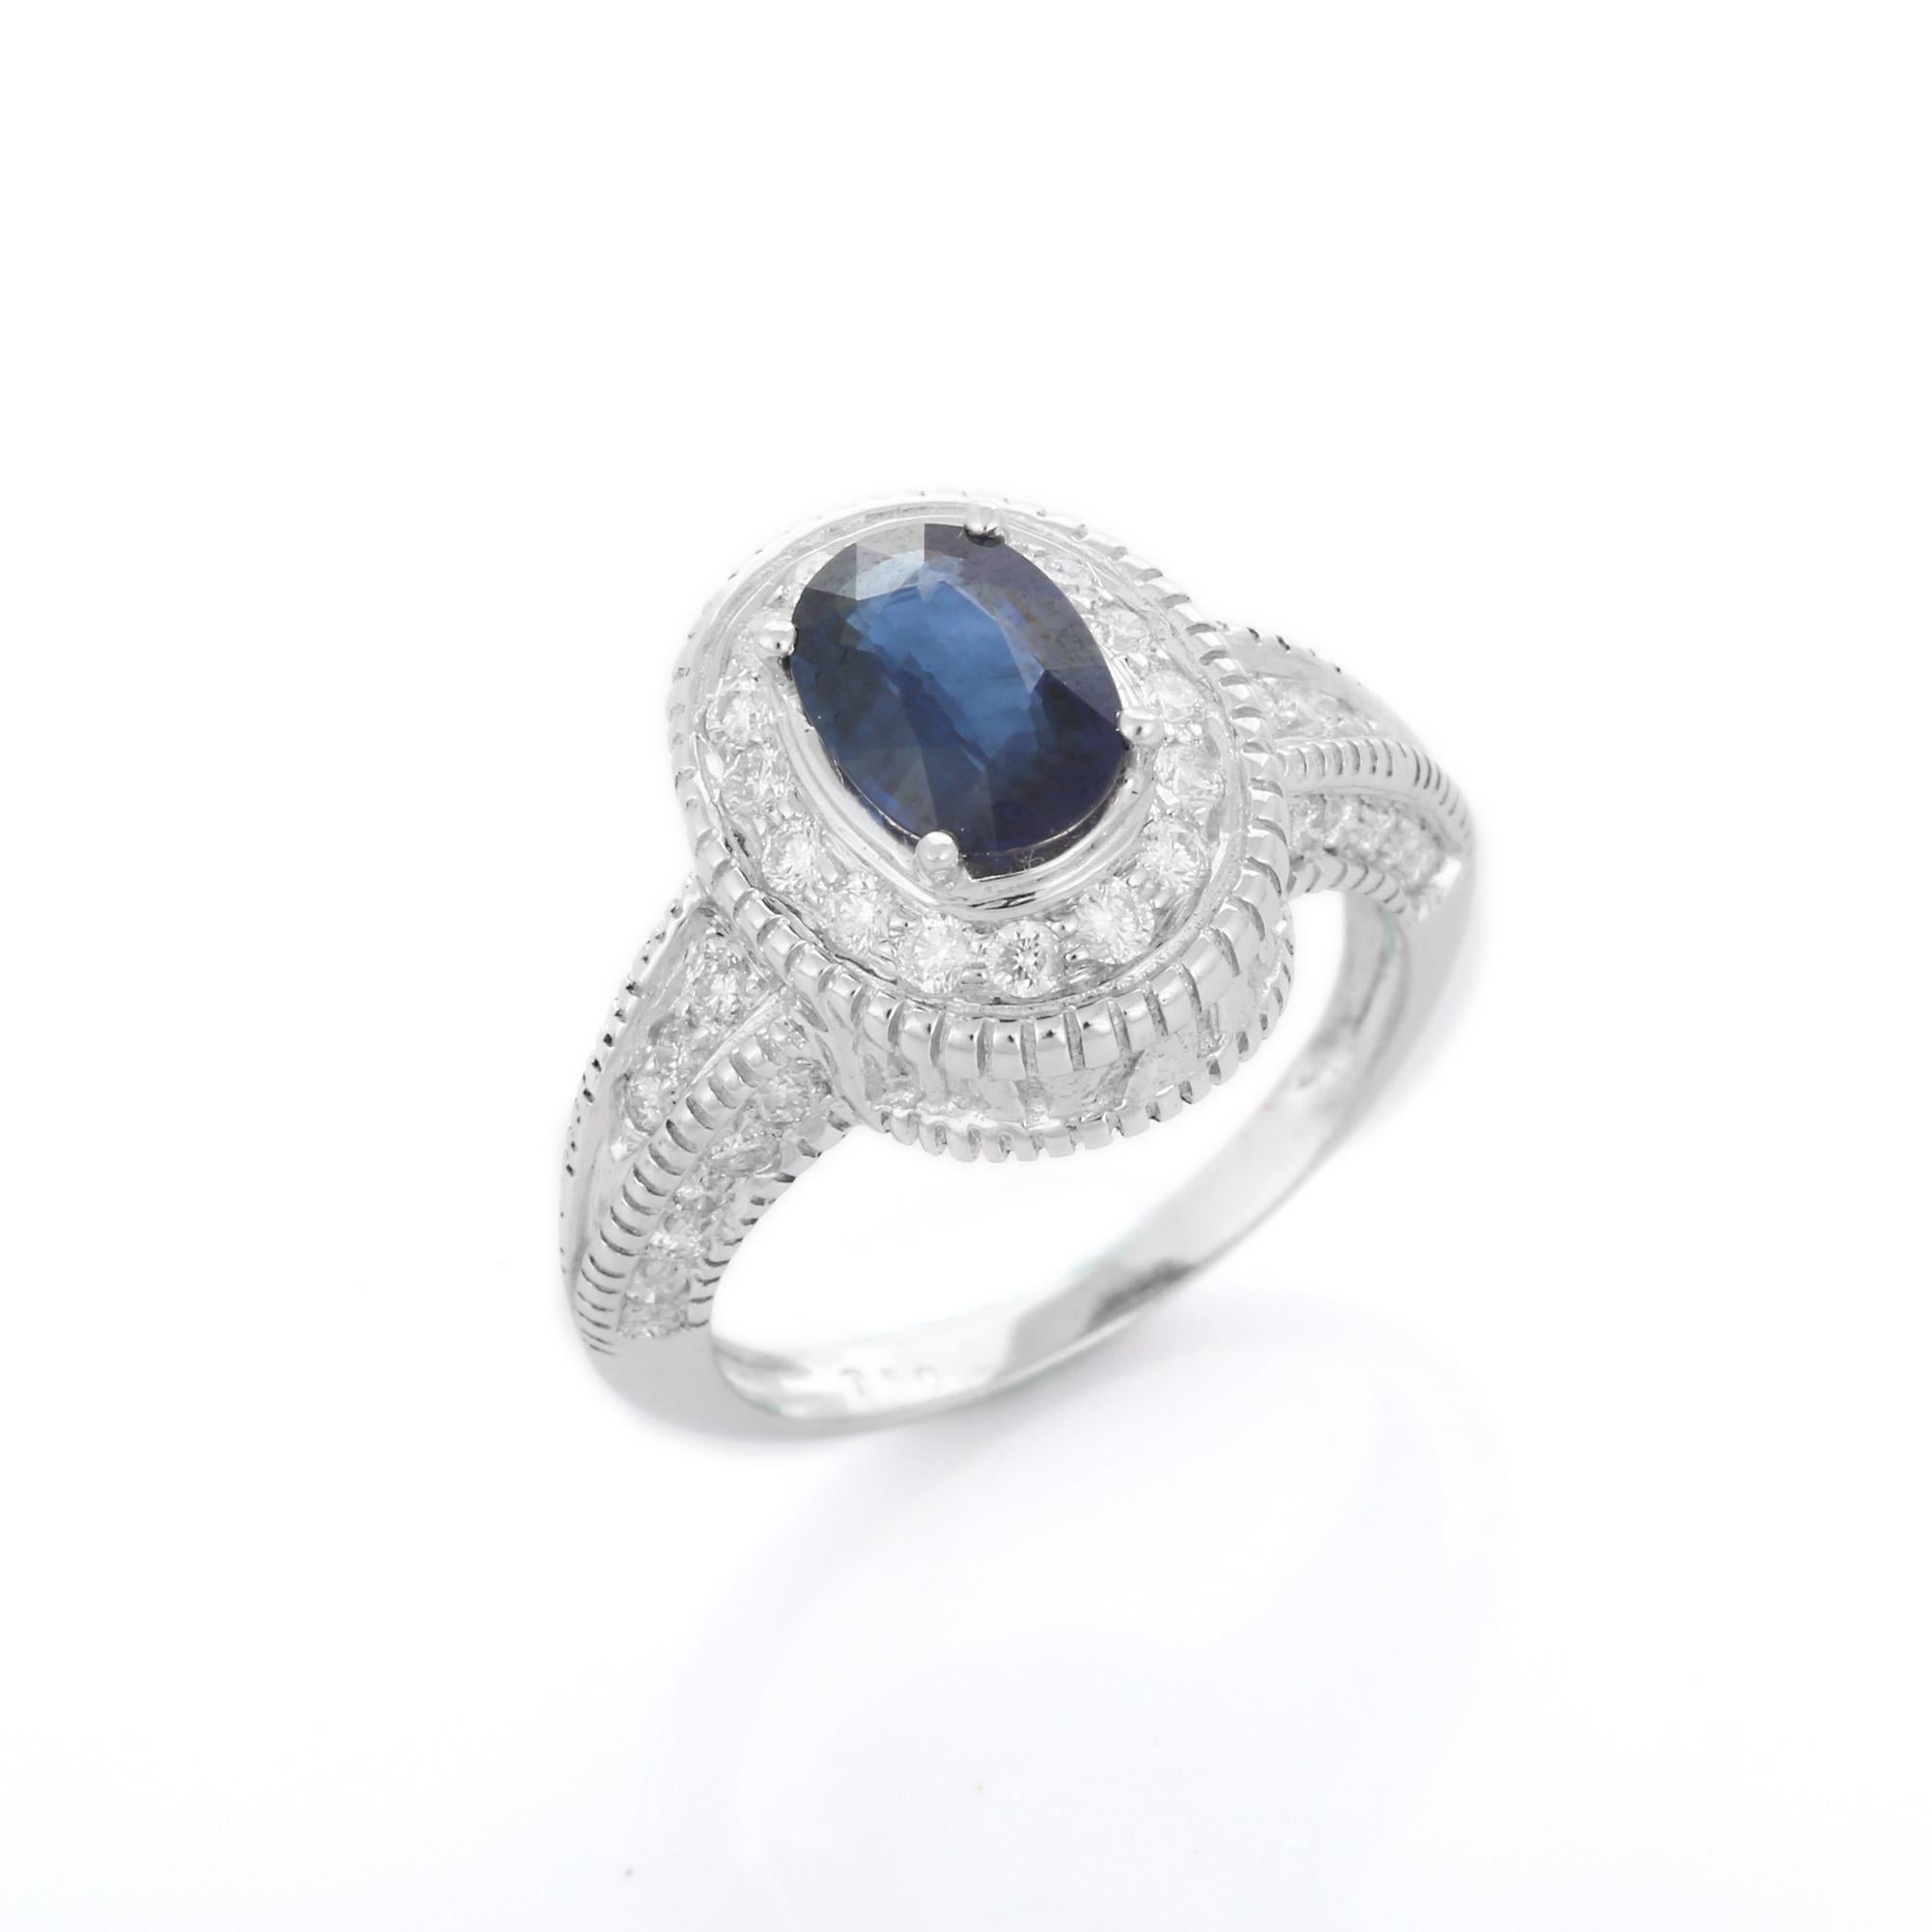 For Sale:  Blue Sapphire Amid Diamonds in 18K Solid White Gold Wedding Ring 5